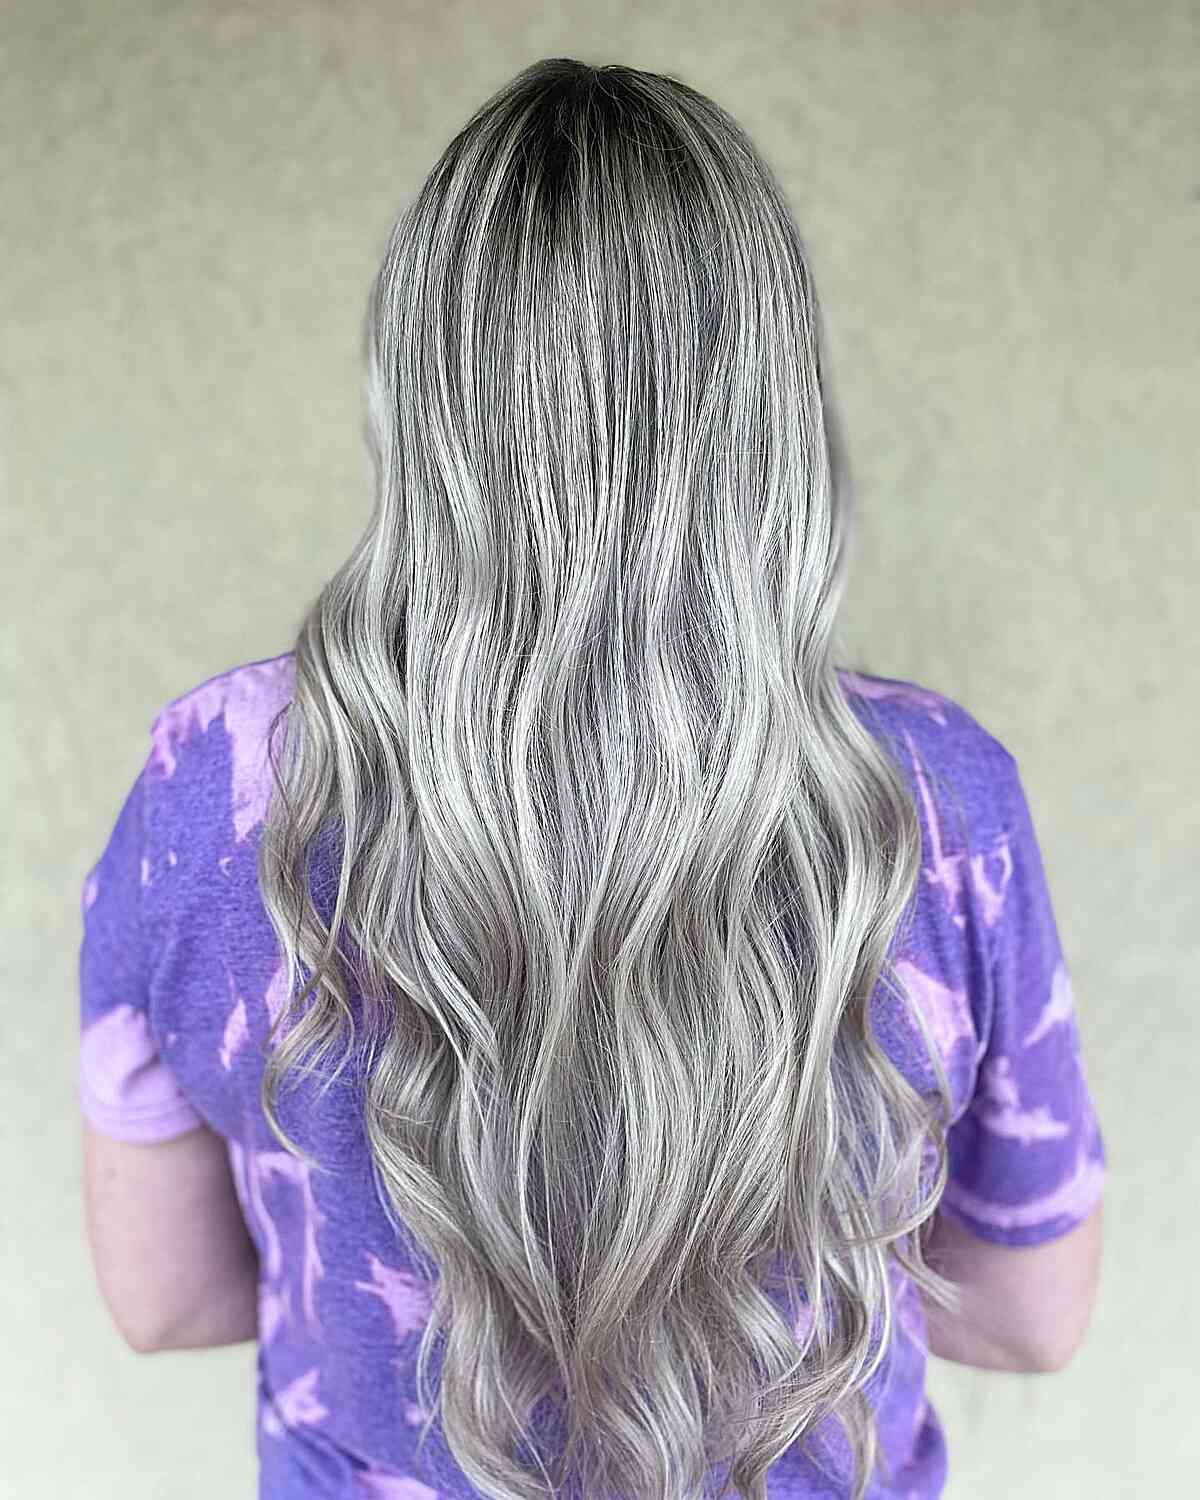 25 Icy Blonde Balayage Ideas for a Stunning Blonde Makeover